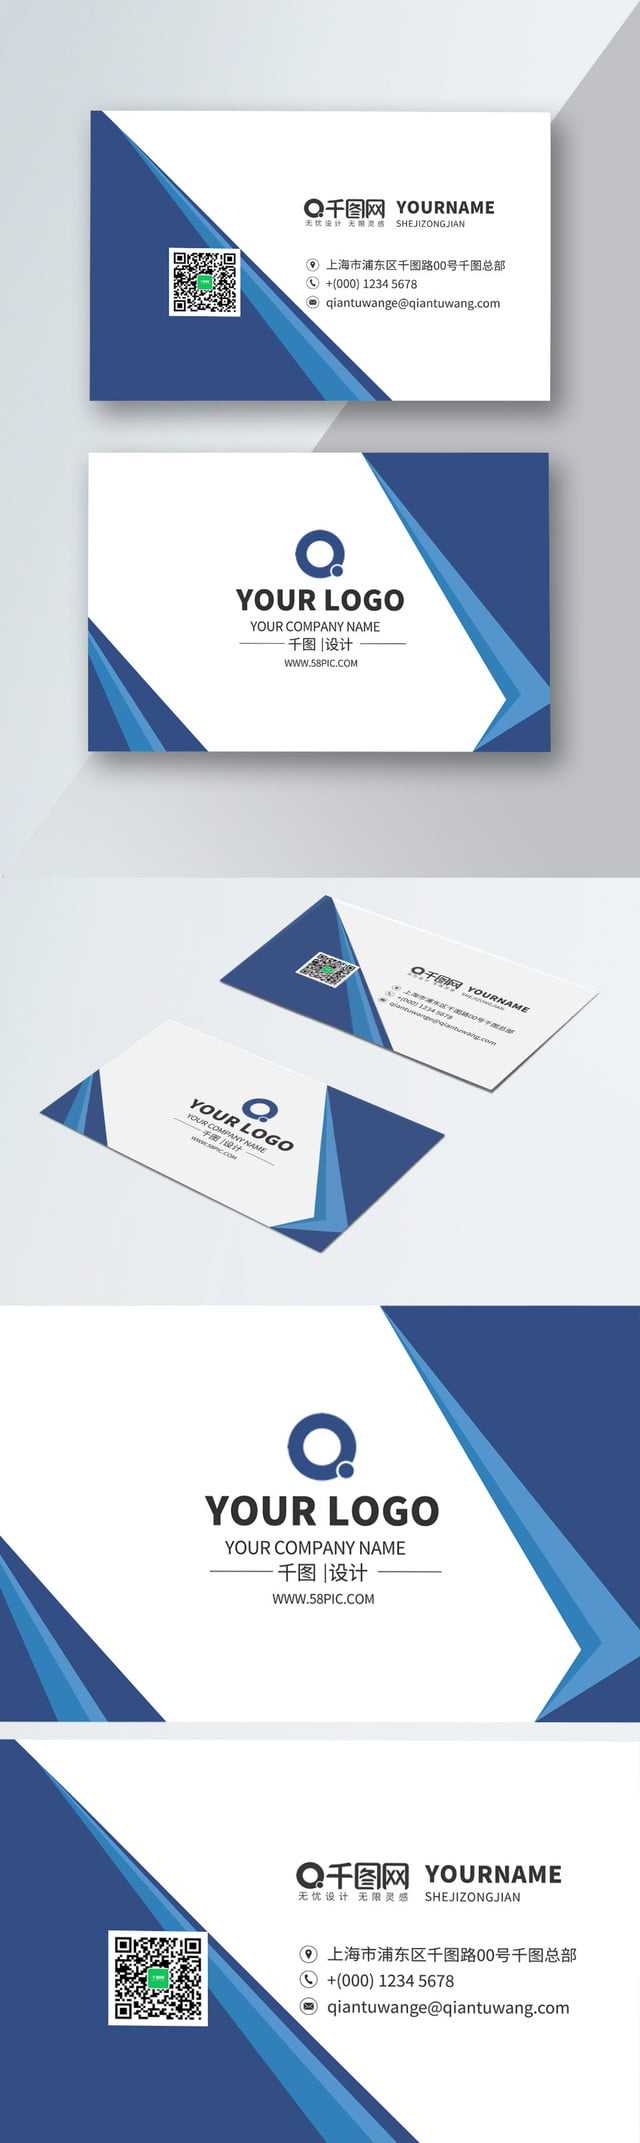 Printing Advertising Business Card Vector Material Printing Regarding Advertising Card Template